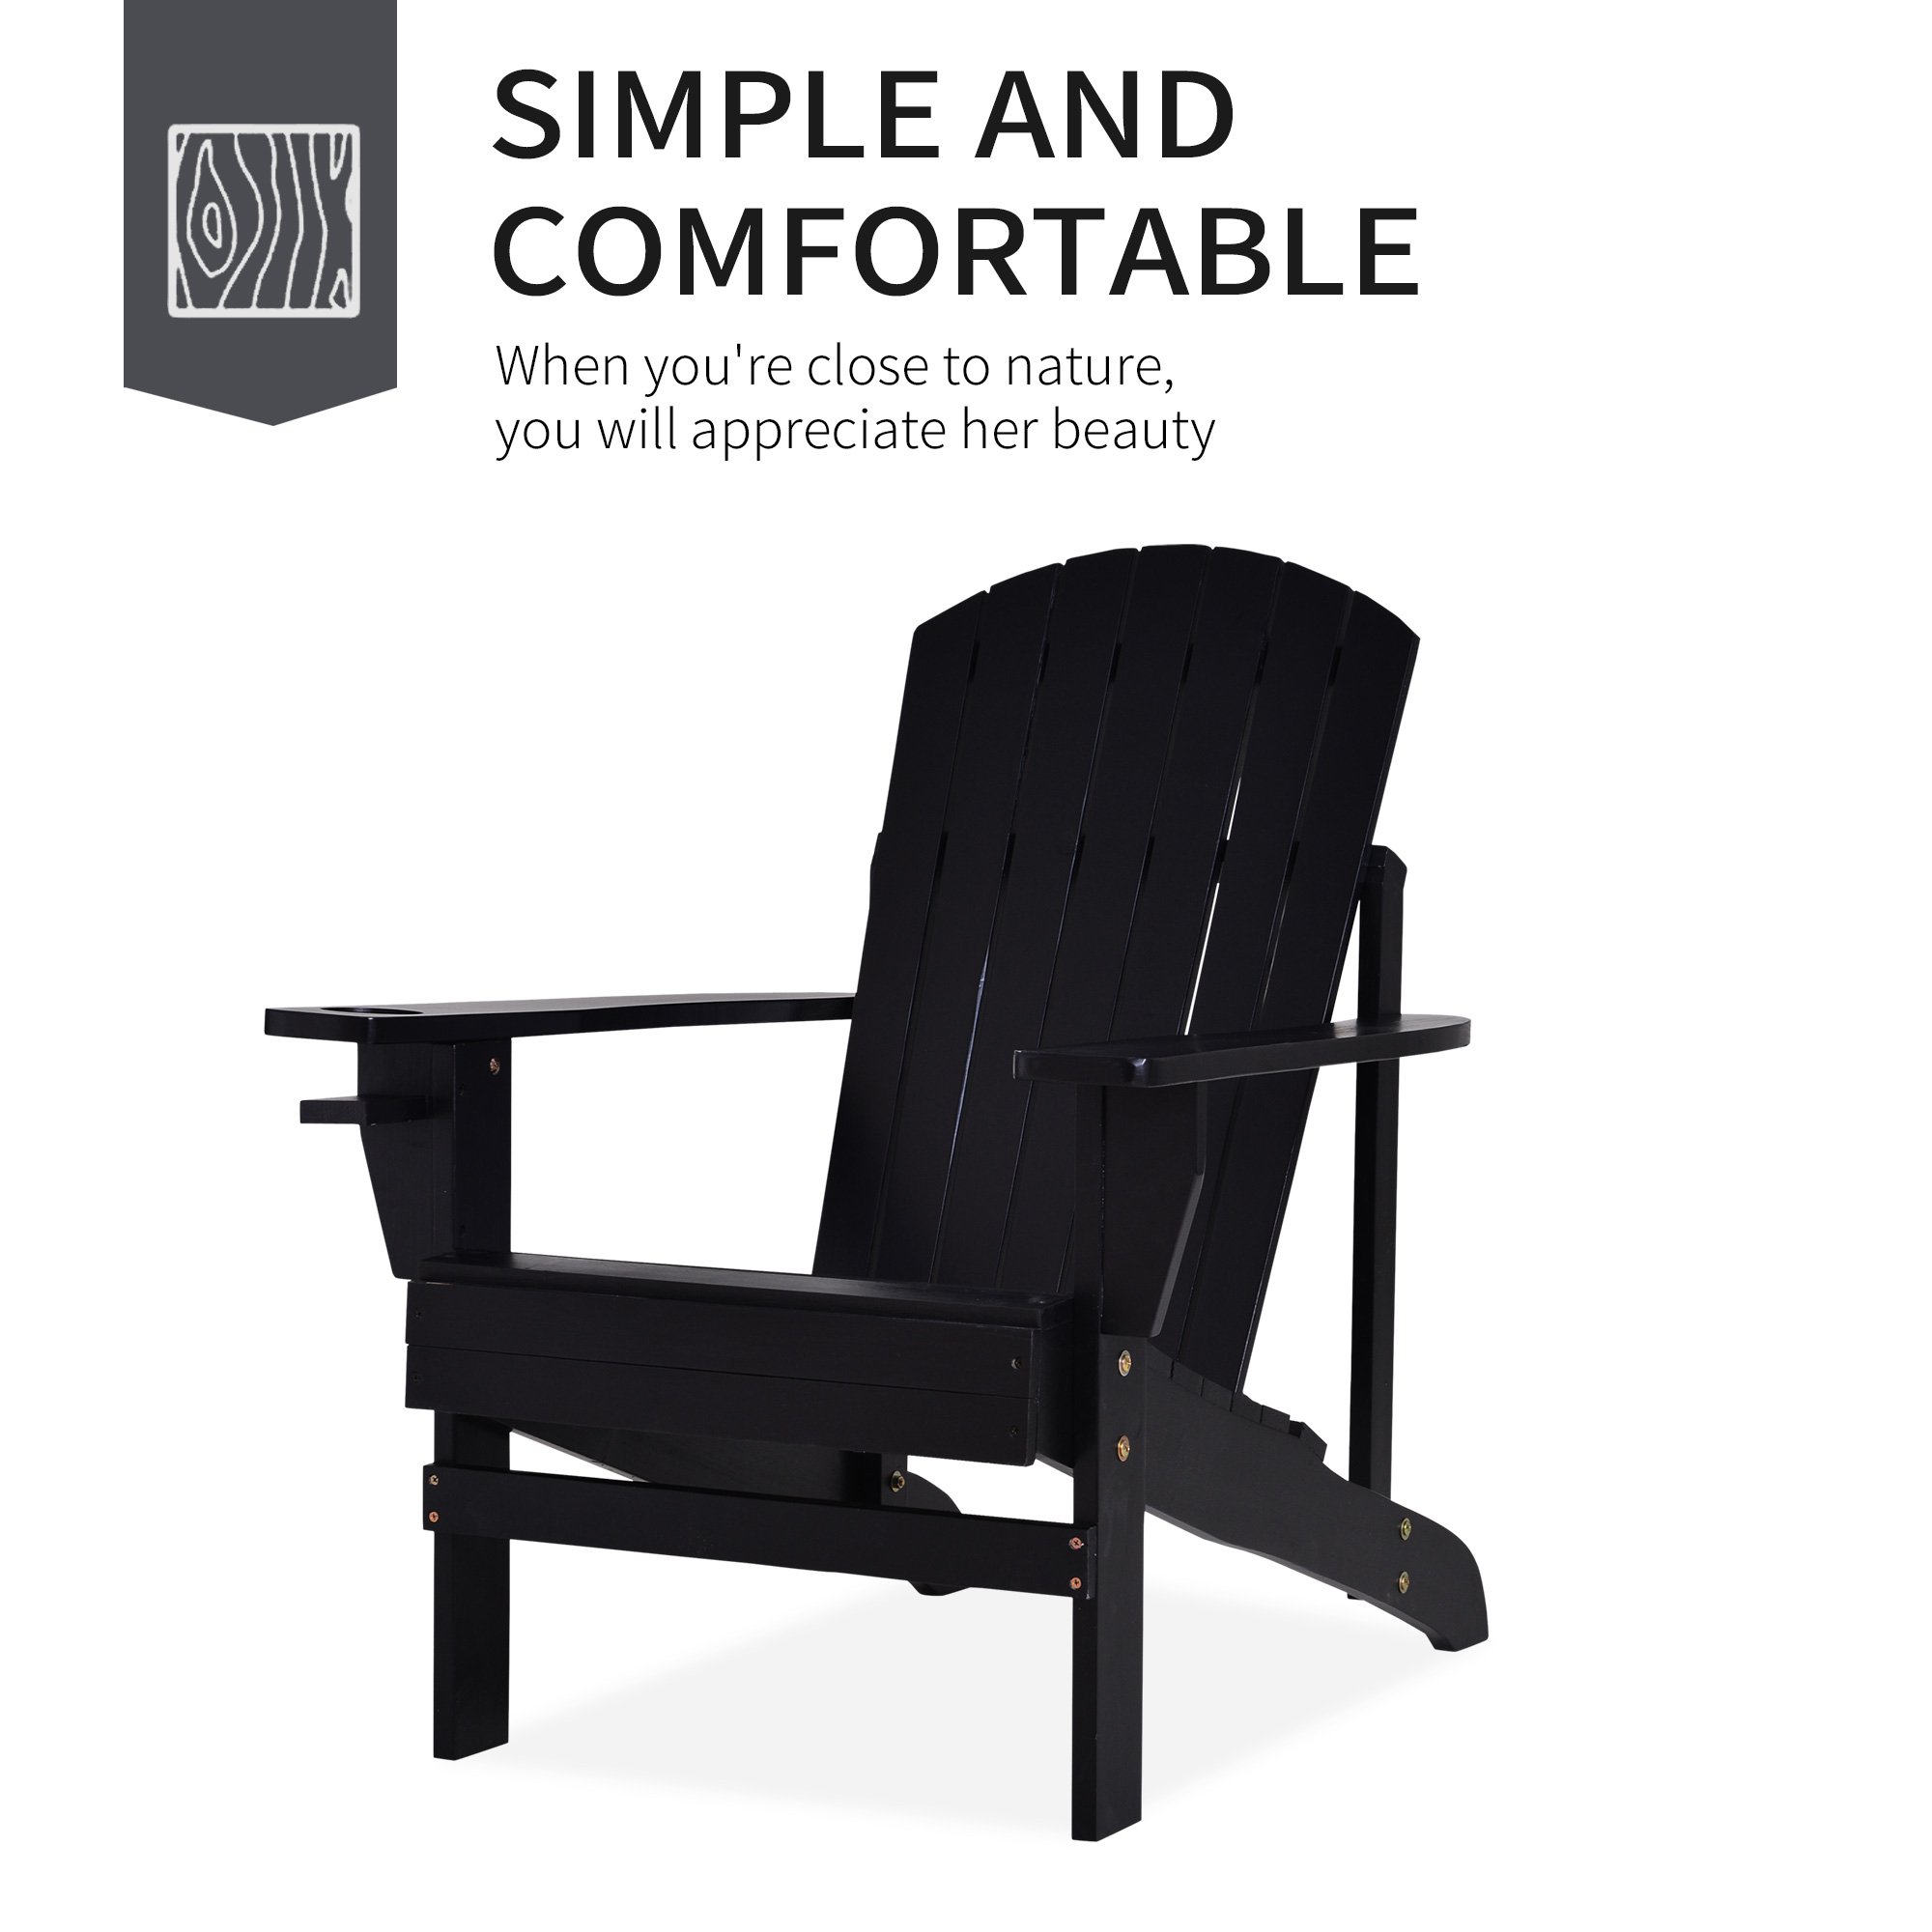 Outsunny Wood Adirondack Chair, Wooden Outdoor & Patio Seating, Black - image 3 of 9